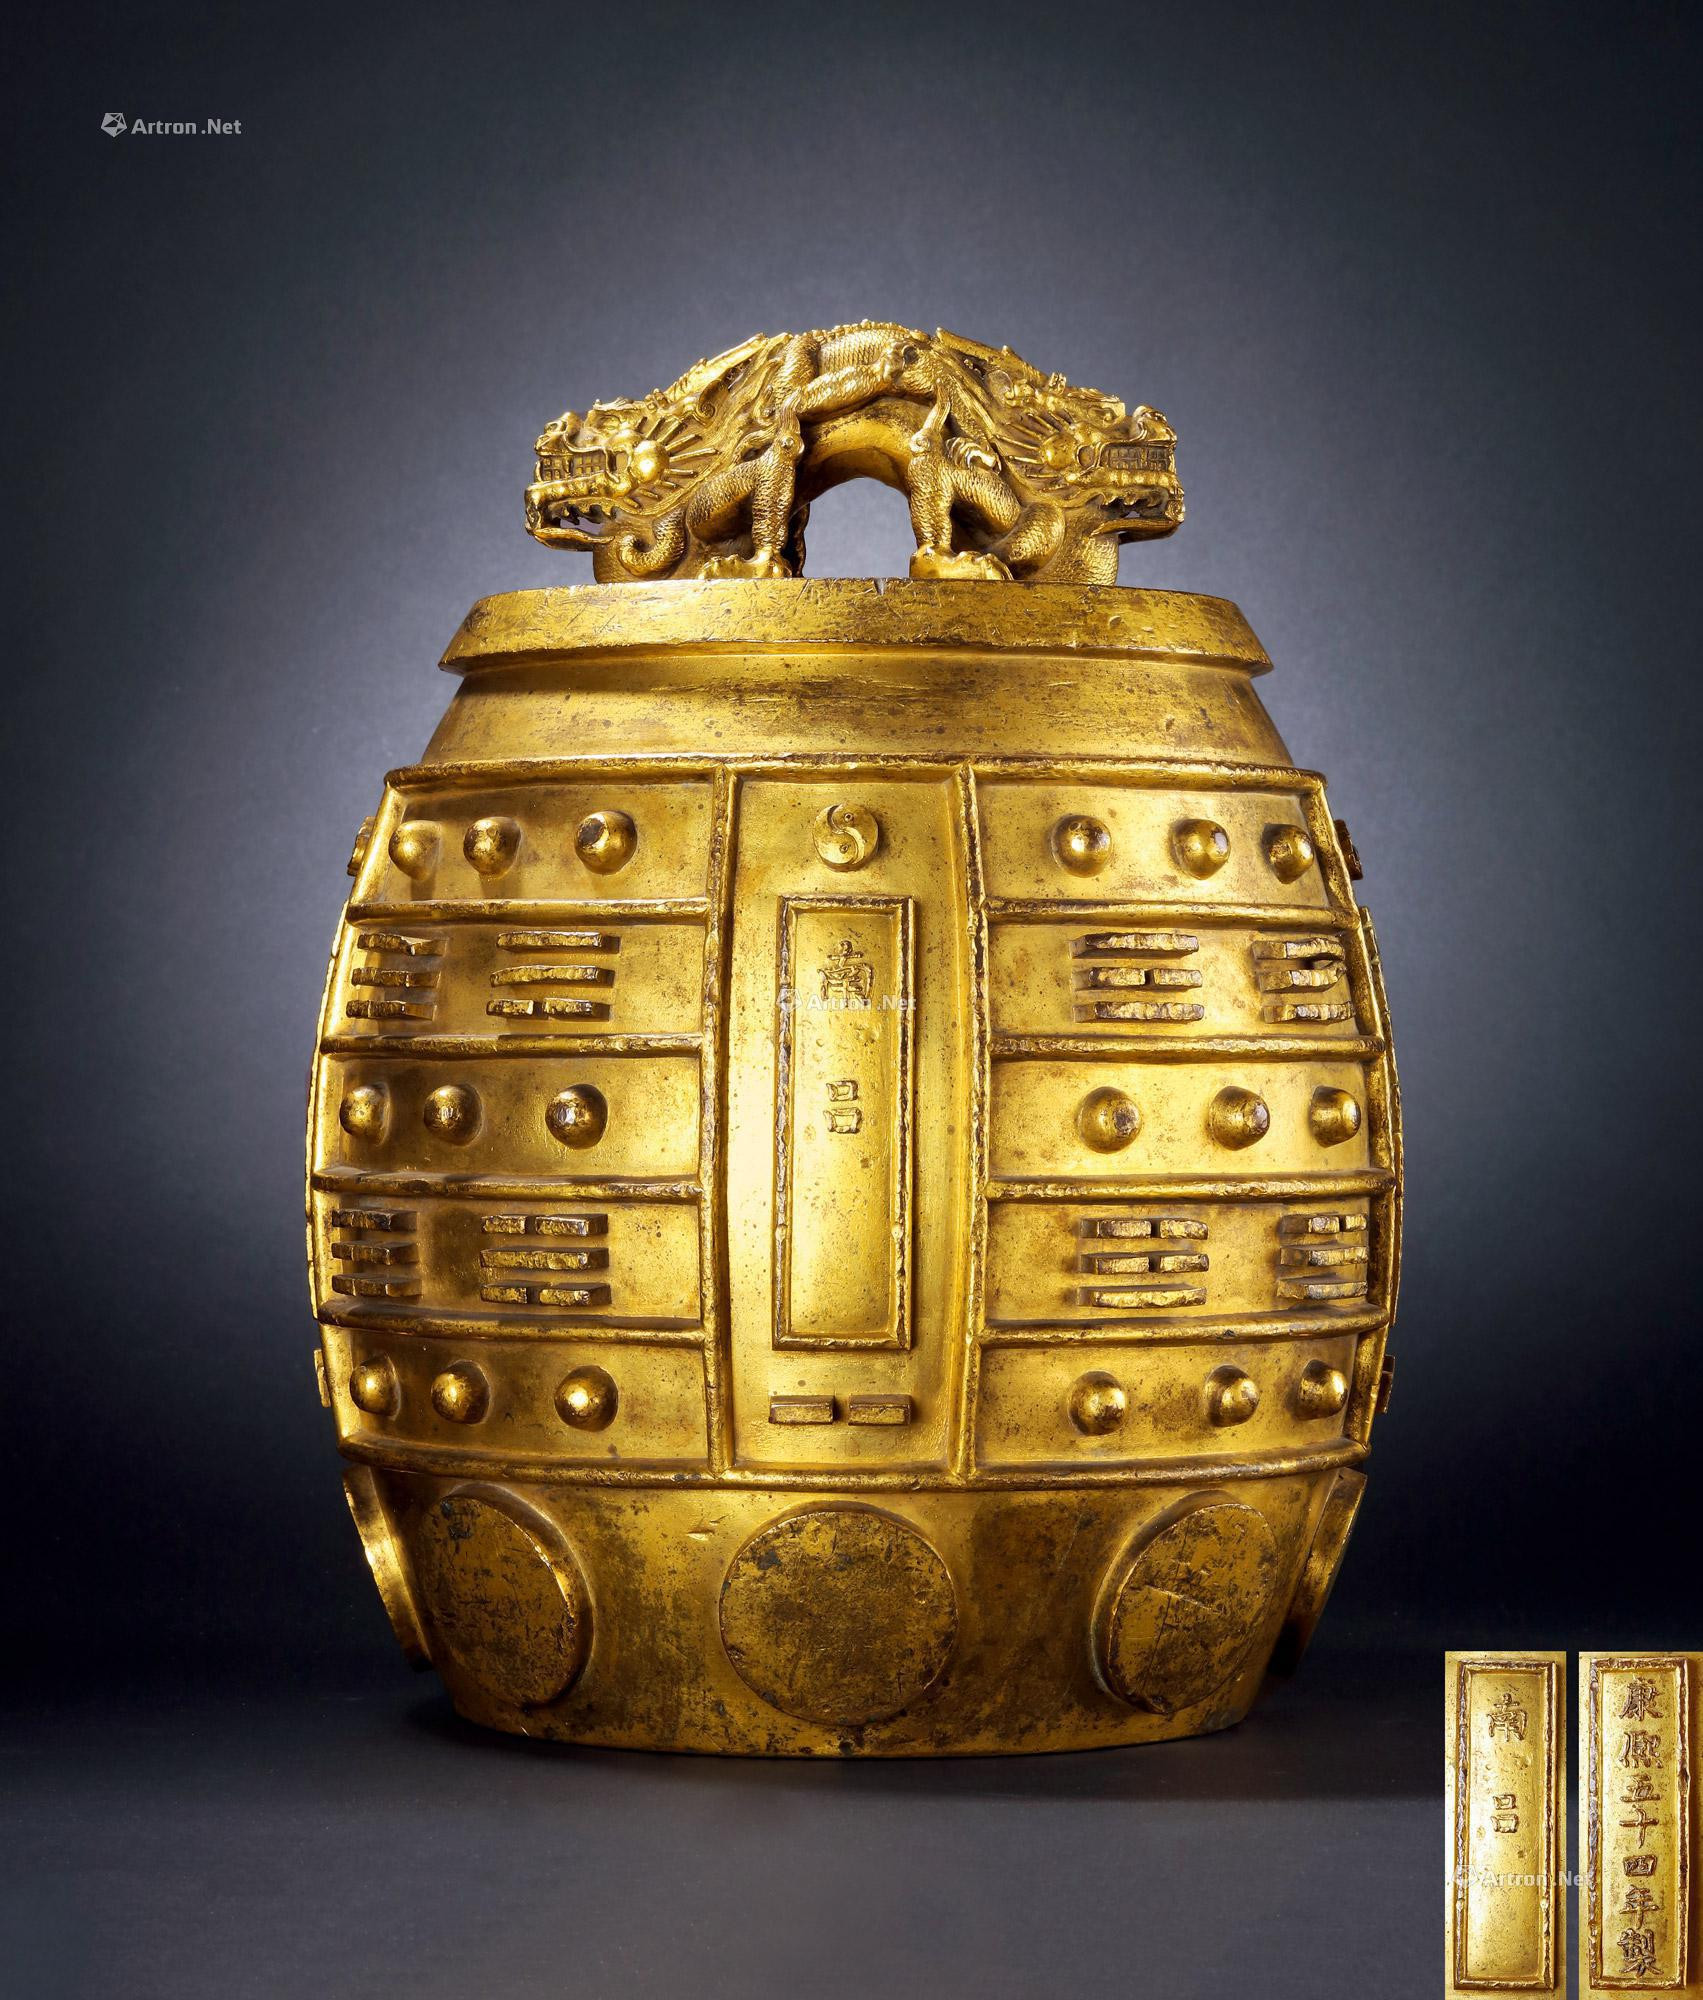 A EXTREMELY IMPORTANT AND LARGE IMPERIAL GILT-BRONZE ARCHAISTIC RITUAL CHIME， BIANZHONG， NAN LV